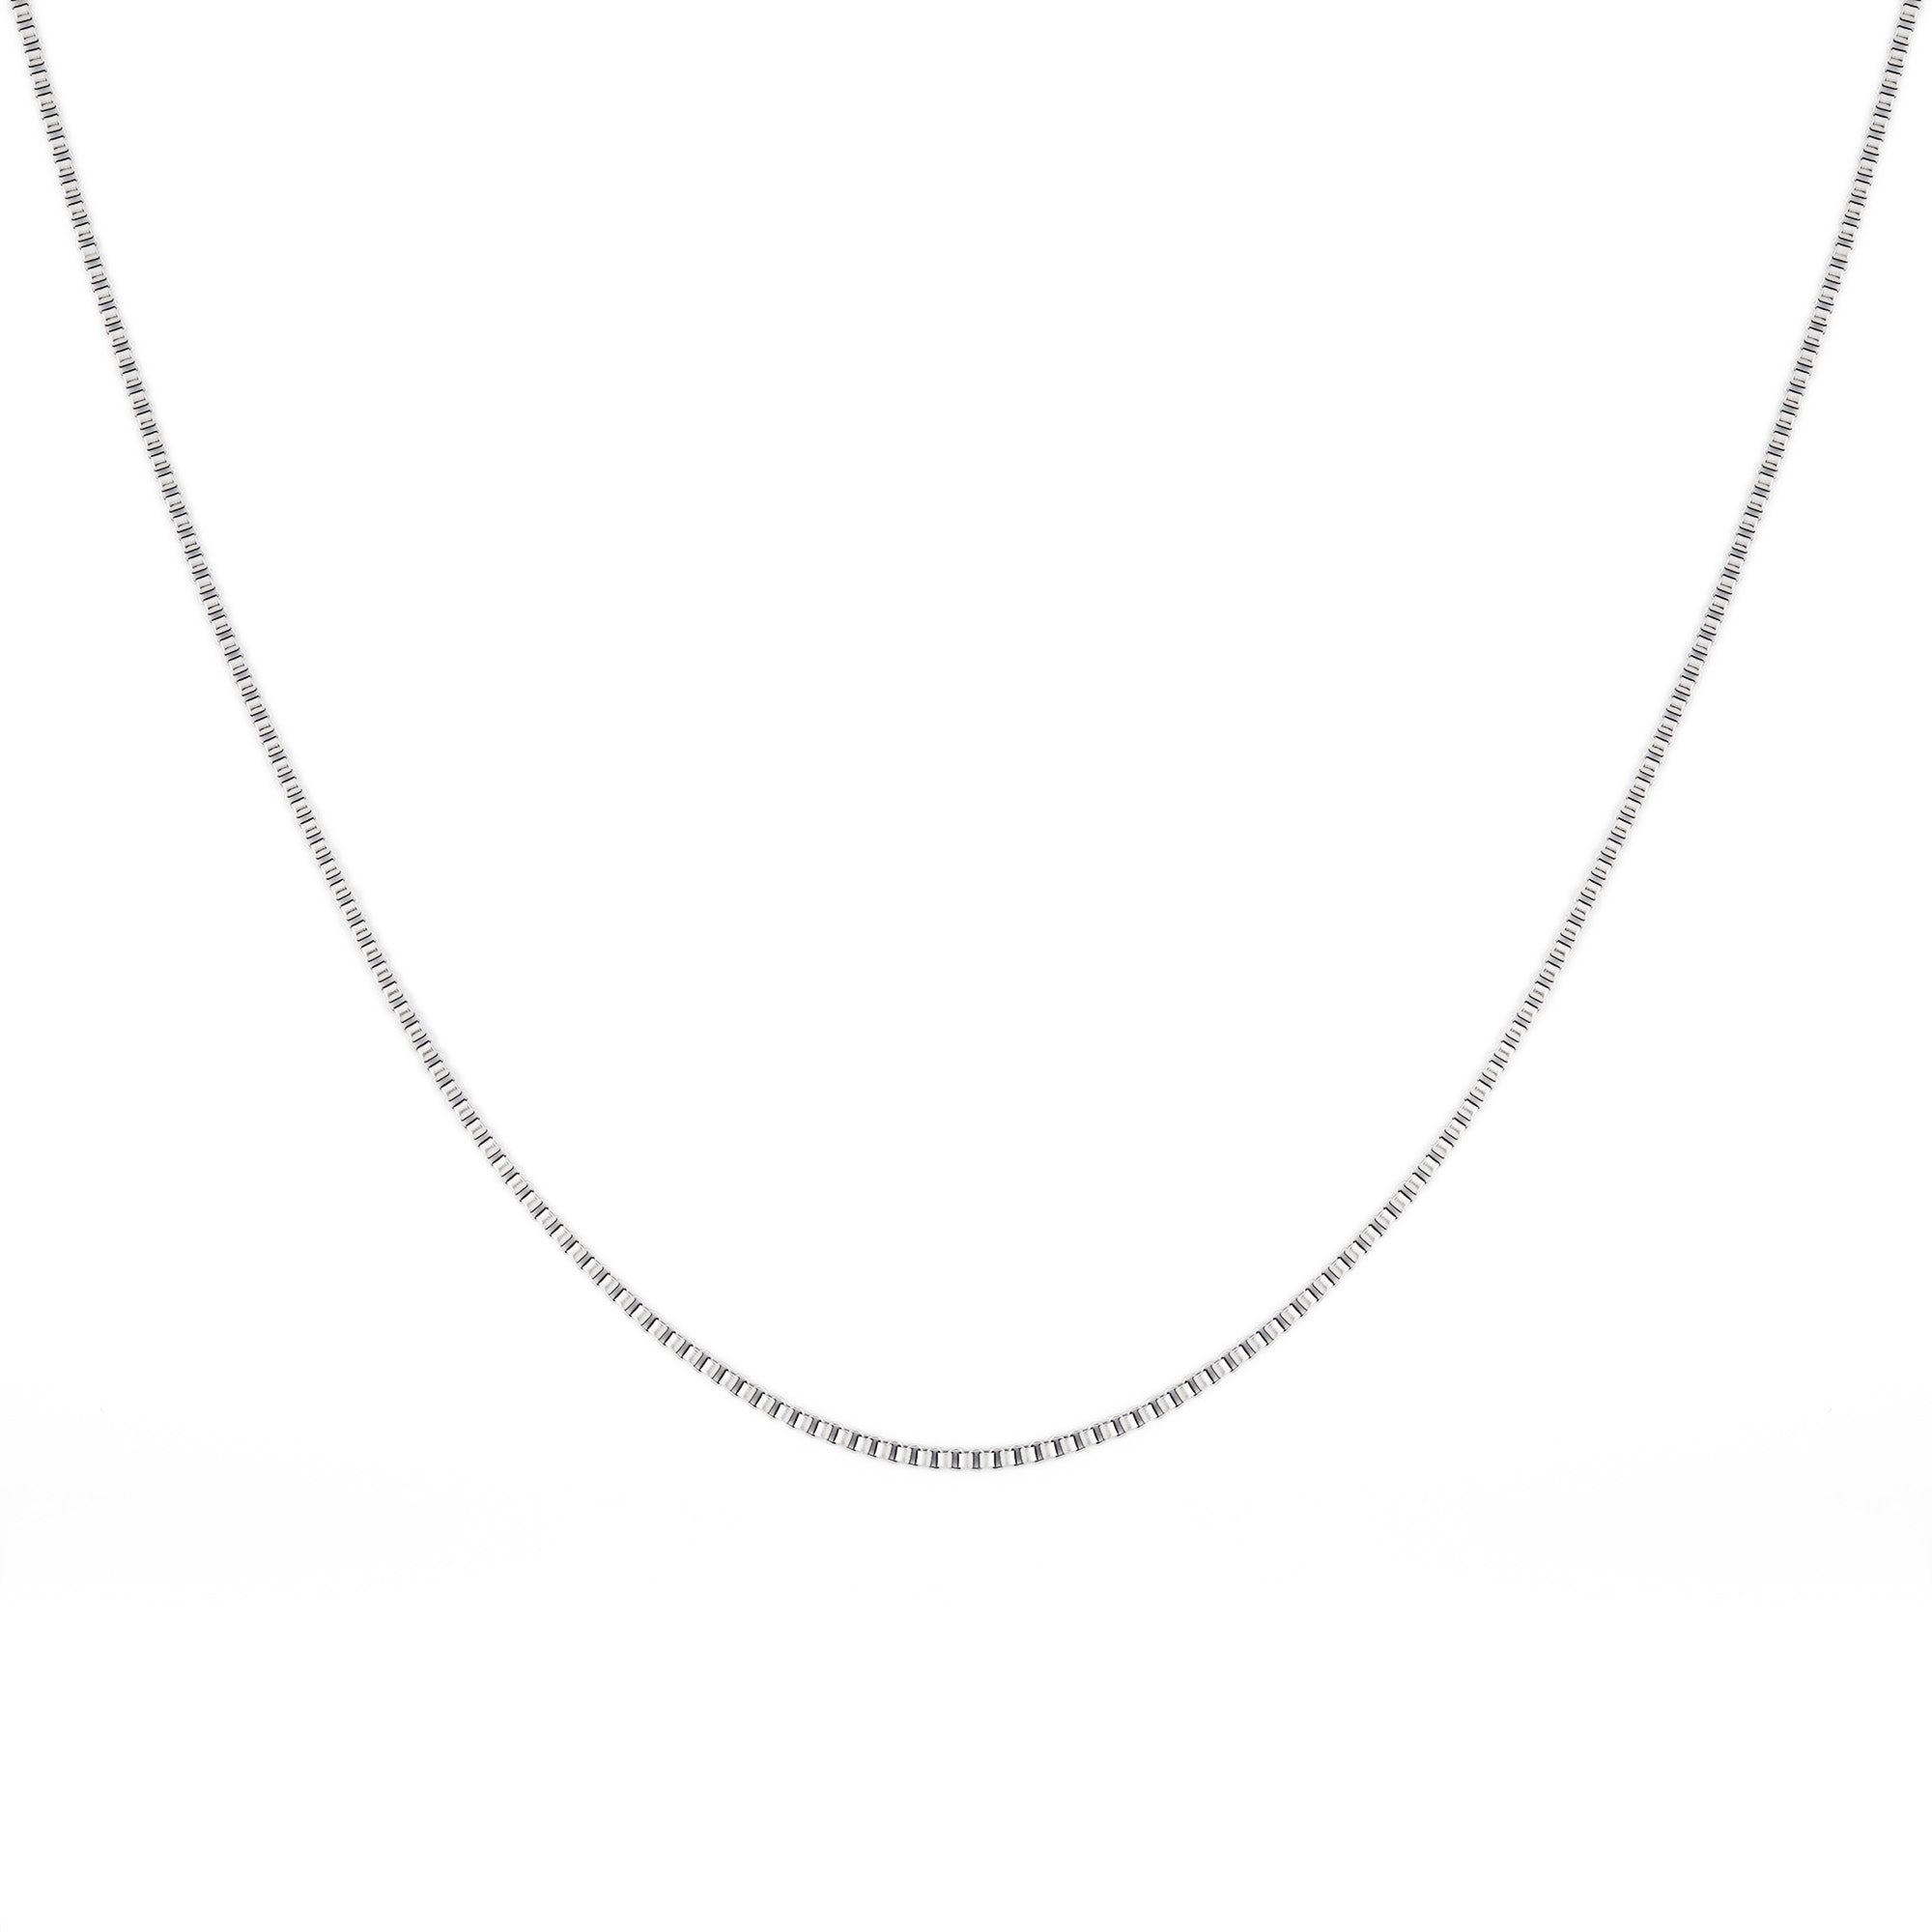 Clyd necklace by Five Jwlry for men, designed in Montreal. Features a 1.5mm square box chain in silver color, highlighted with the brand's signature logo tag.